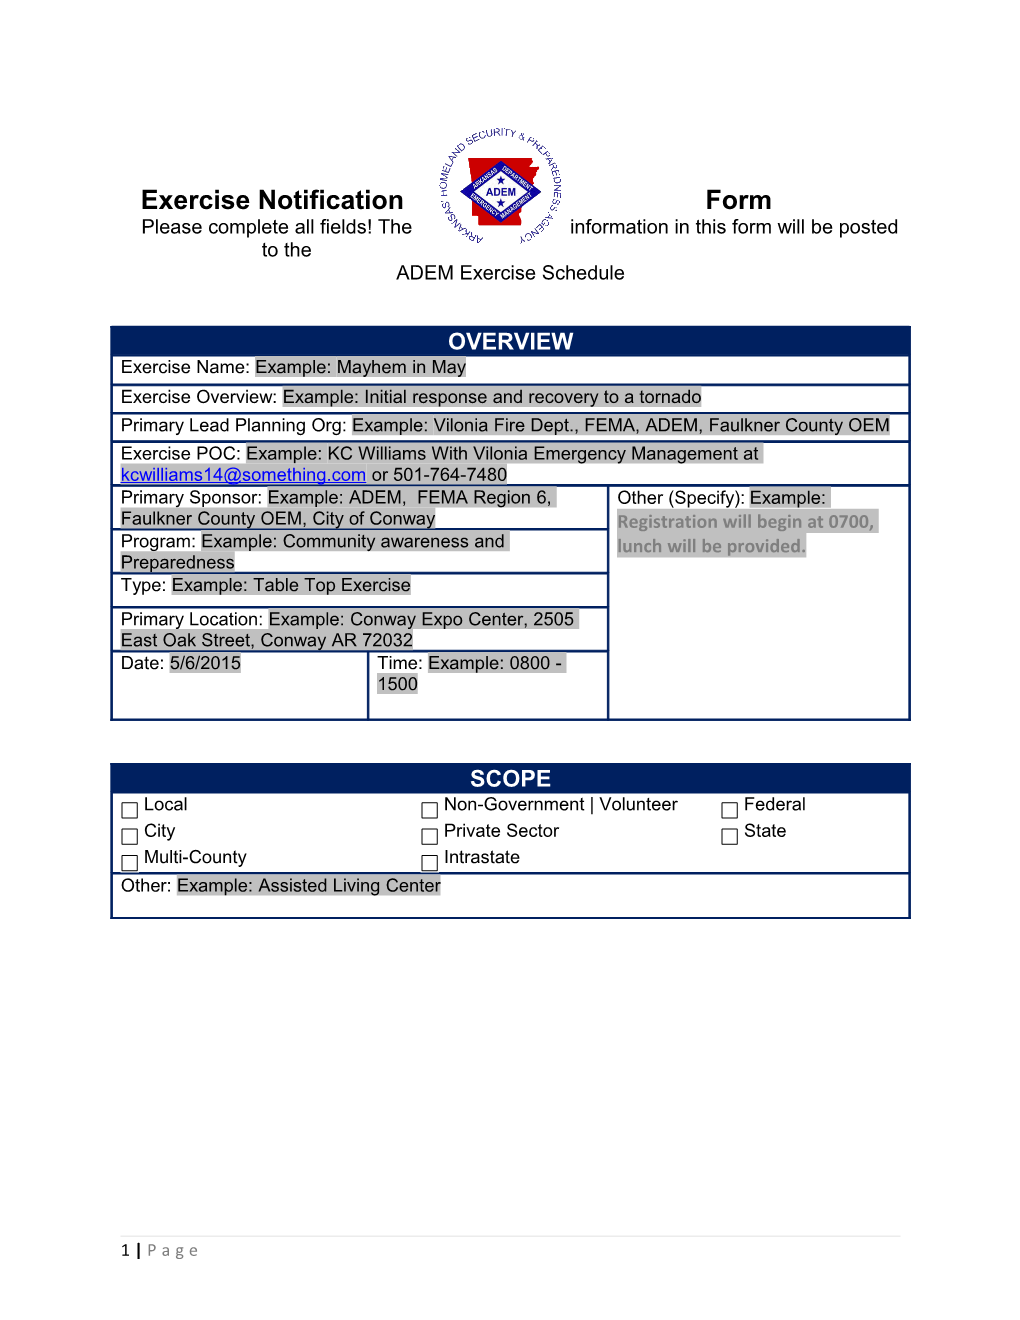 Exercise Notification Form